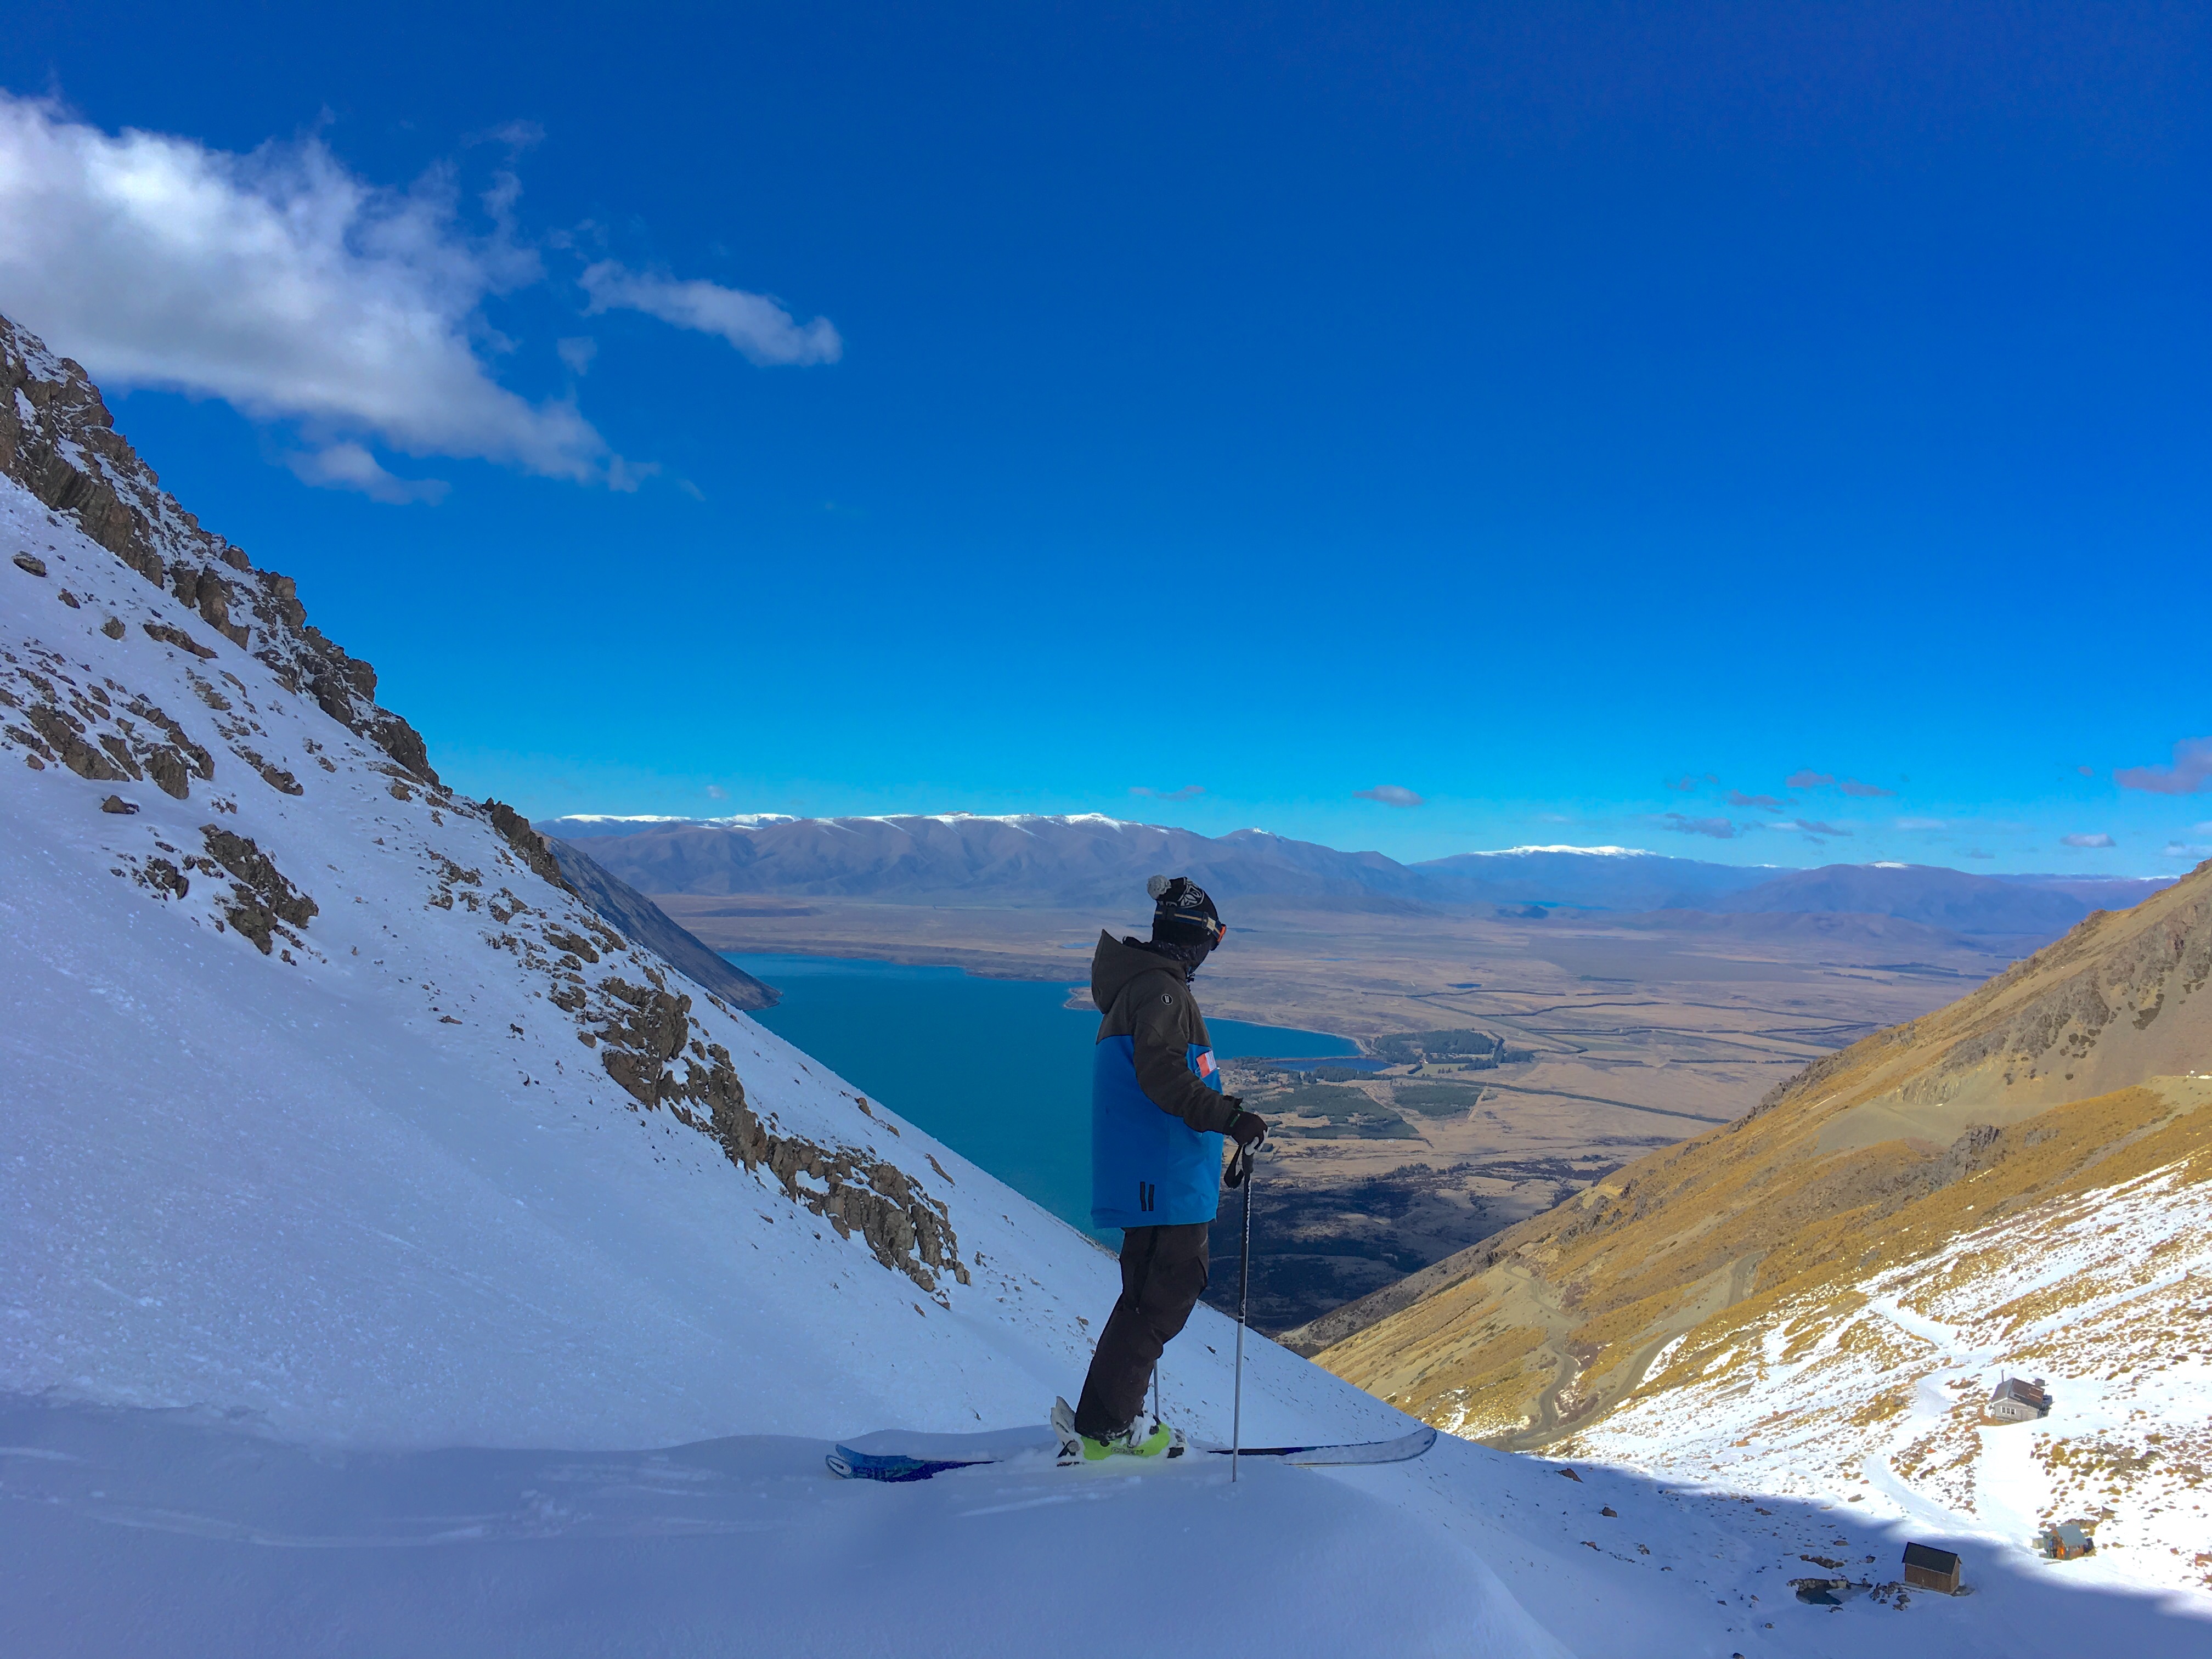 View of Lake Ohau are not to bad to look at while skiing down